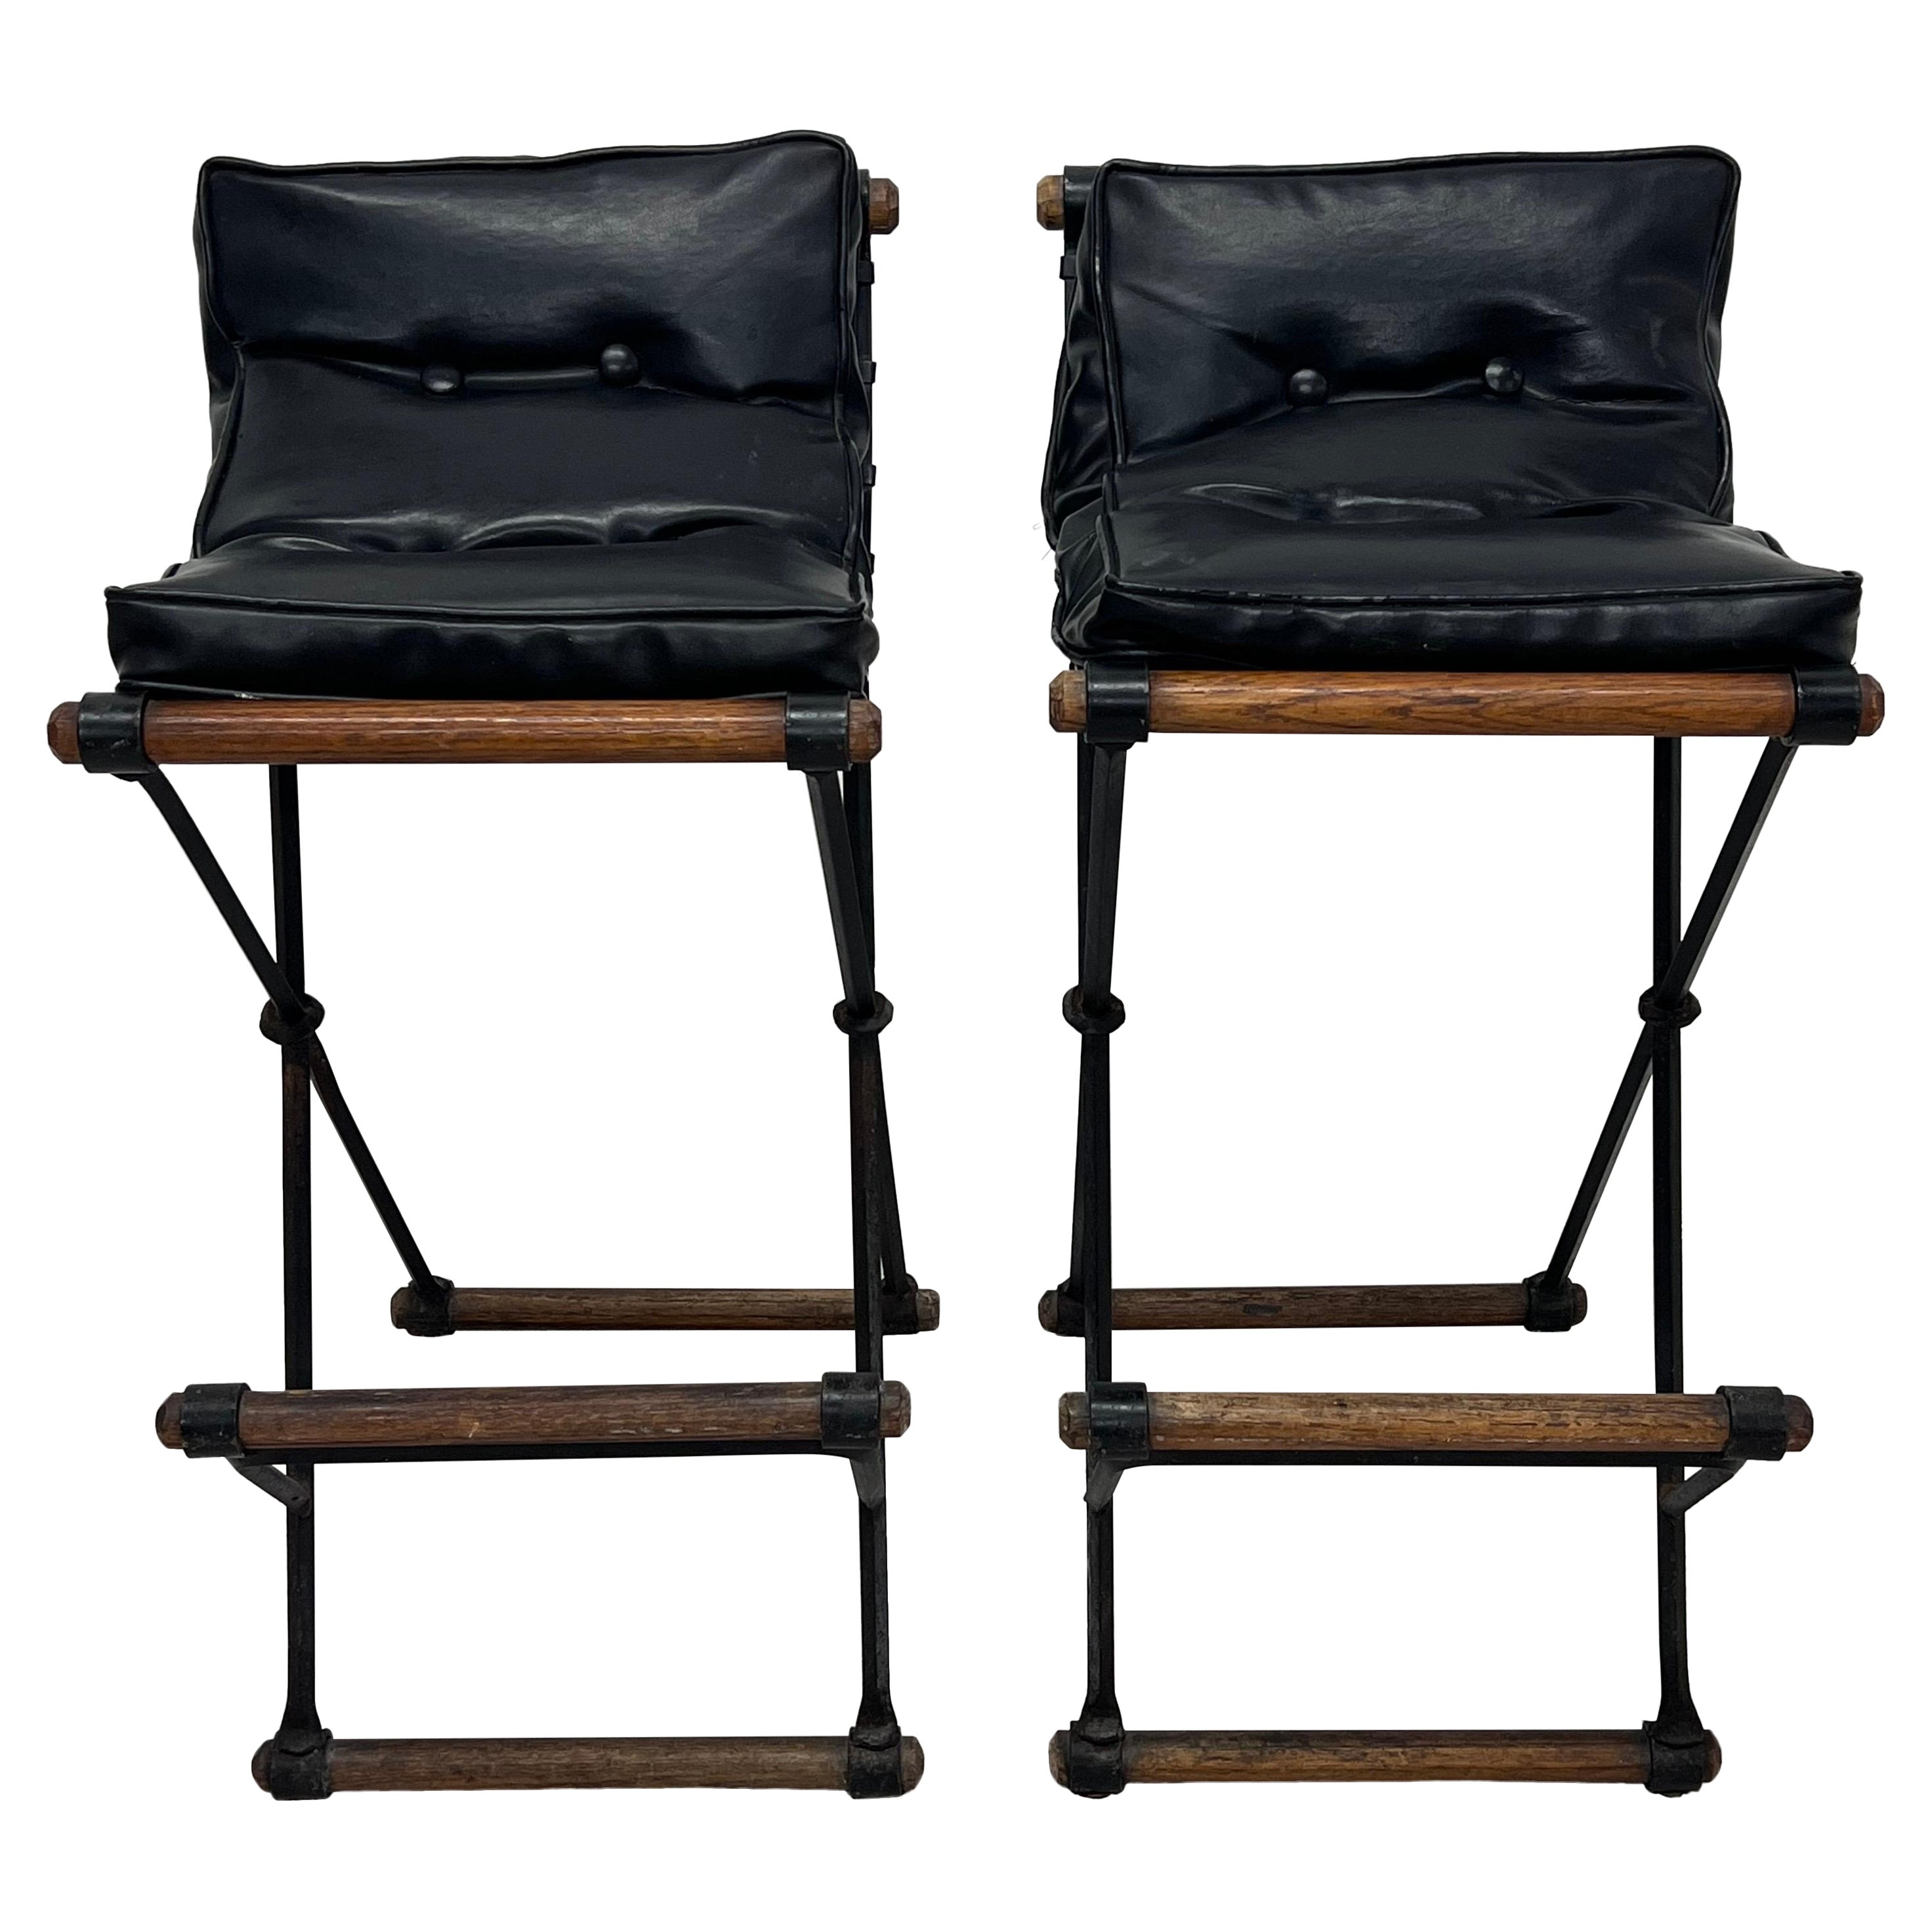 Cleo Baldon Bar Stools with Black Eco-Leather Cushions for Terra, a Pair